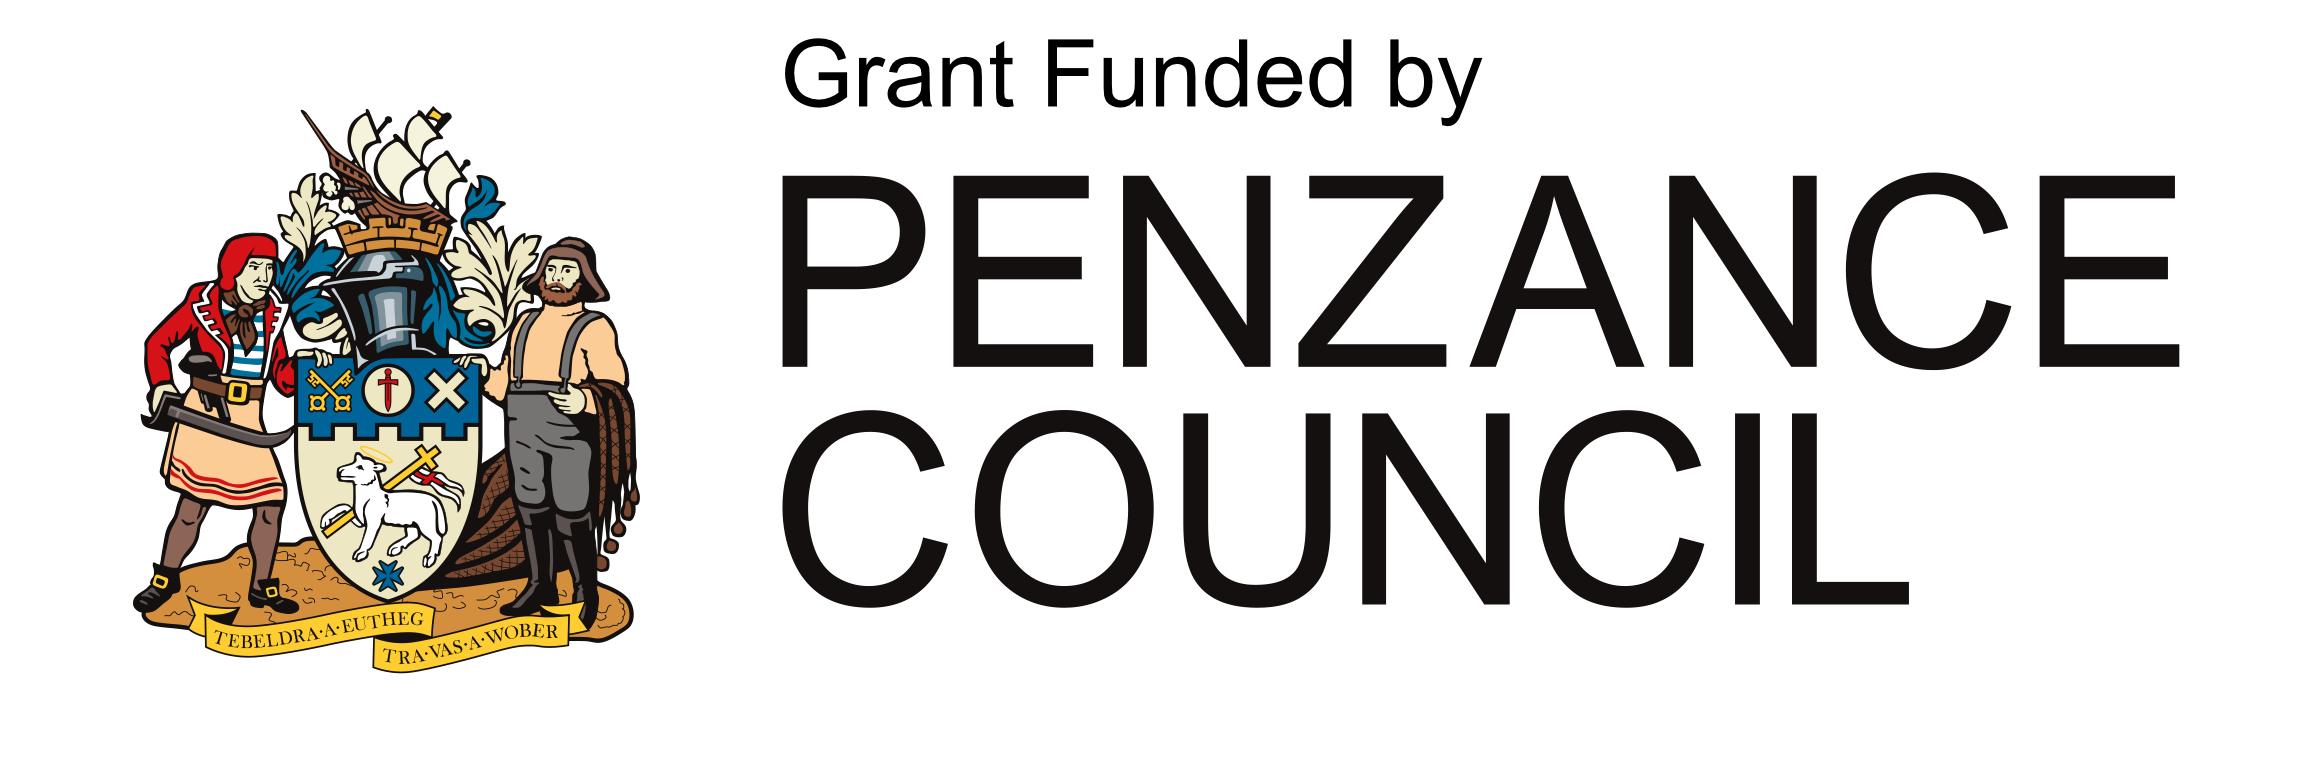 Grant Funded by Penzance Council